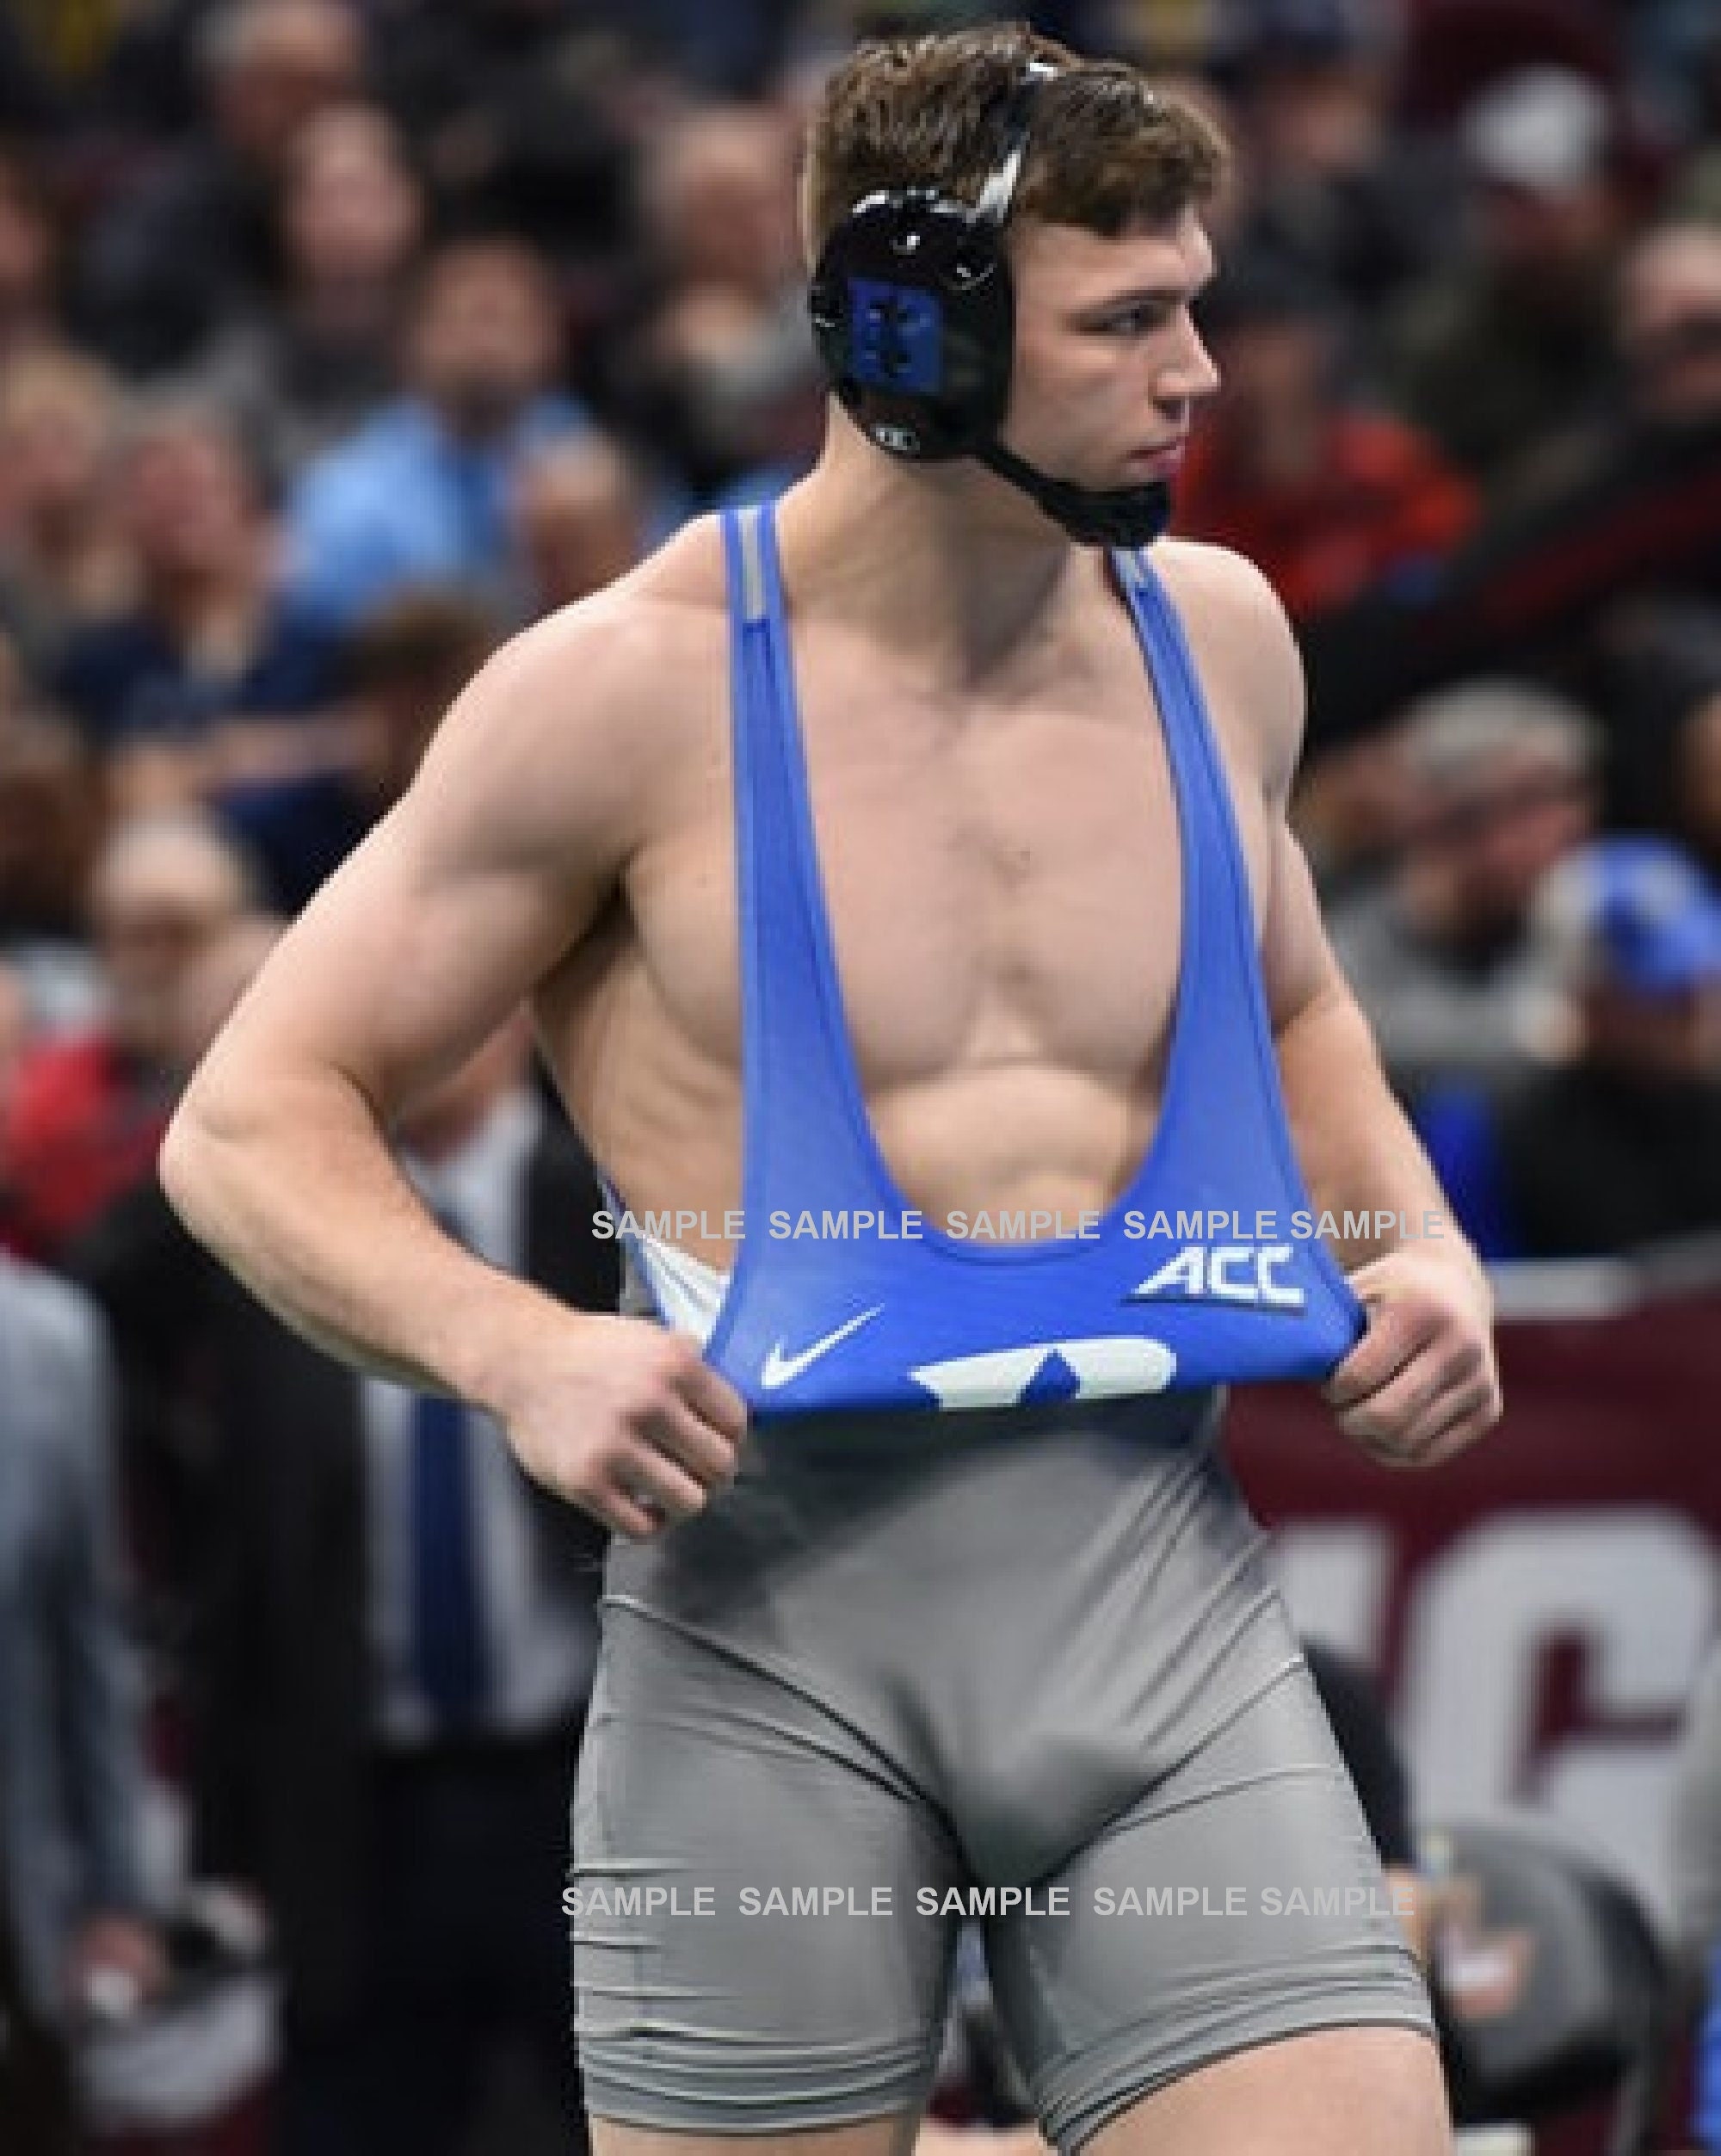 Wrestlers with bulge